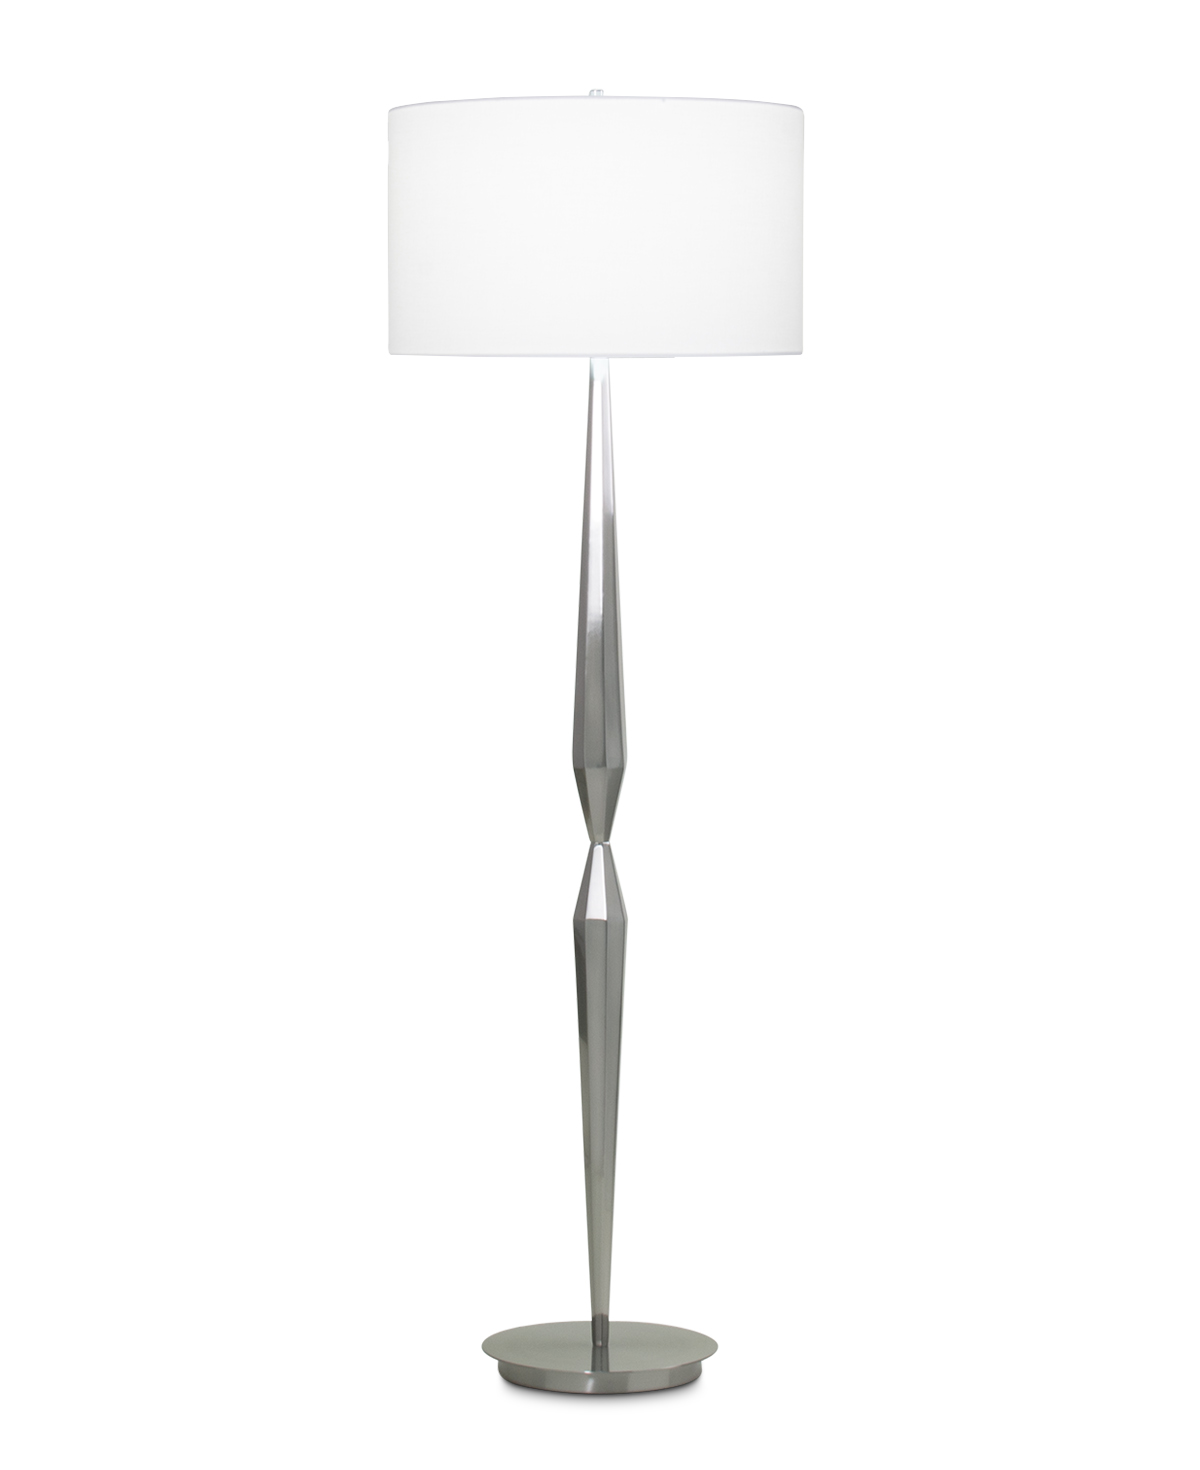 FlowDecor Shaw Floor Lamp in metal with brushed nickel finish and white linen drum shade (# 3885)